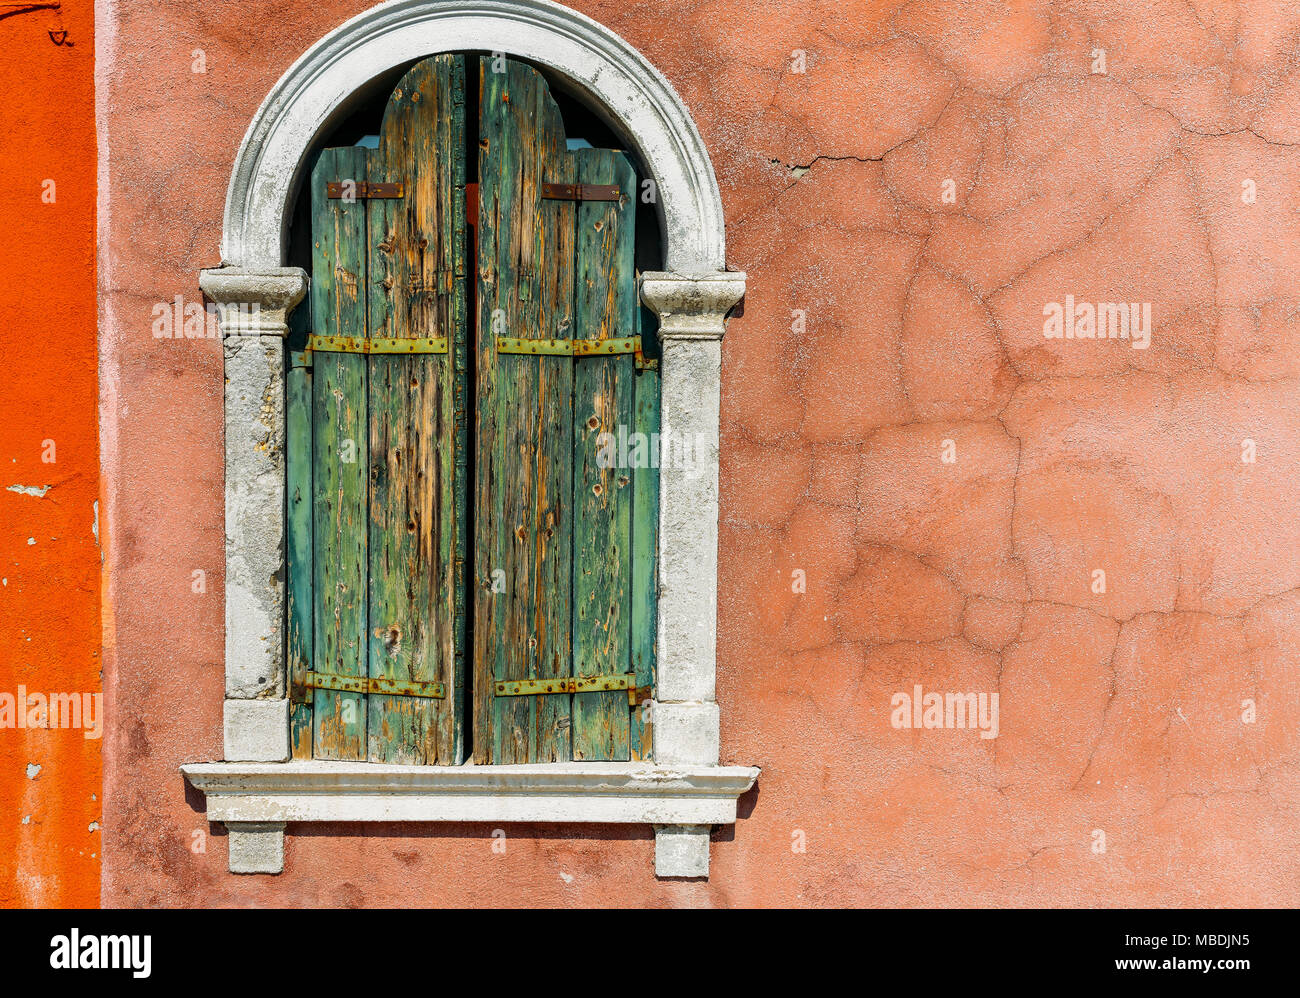 Looking up at an old stucco window frame bathed in light, with white window frames, in Venice, Italy. Stock Photo